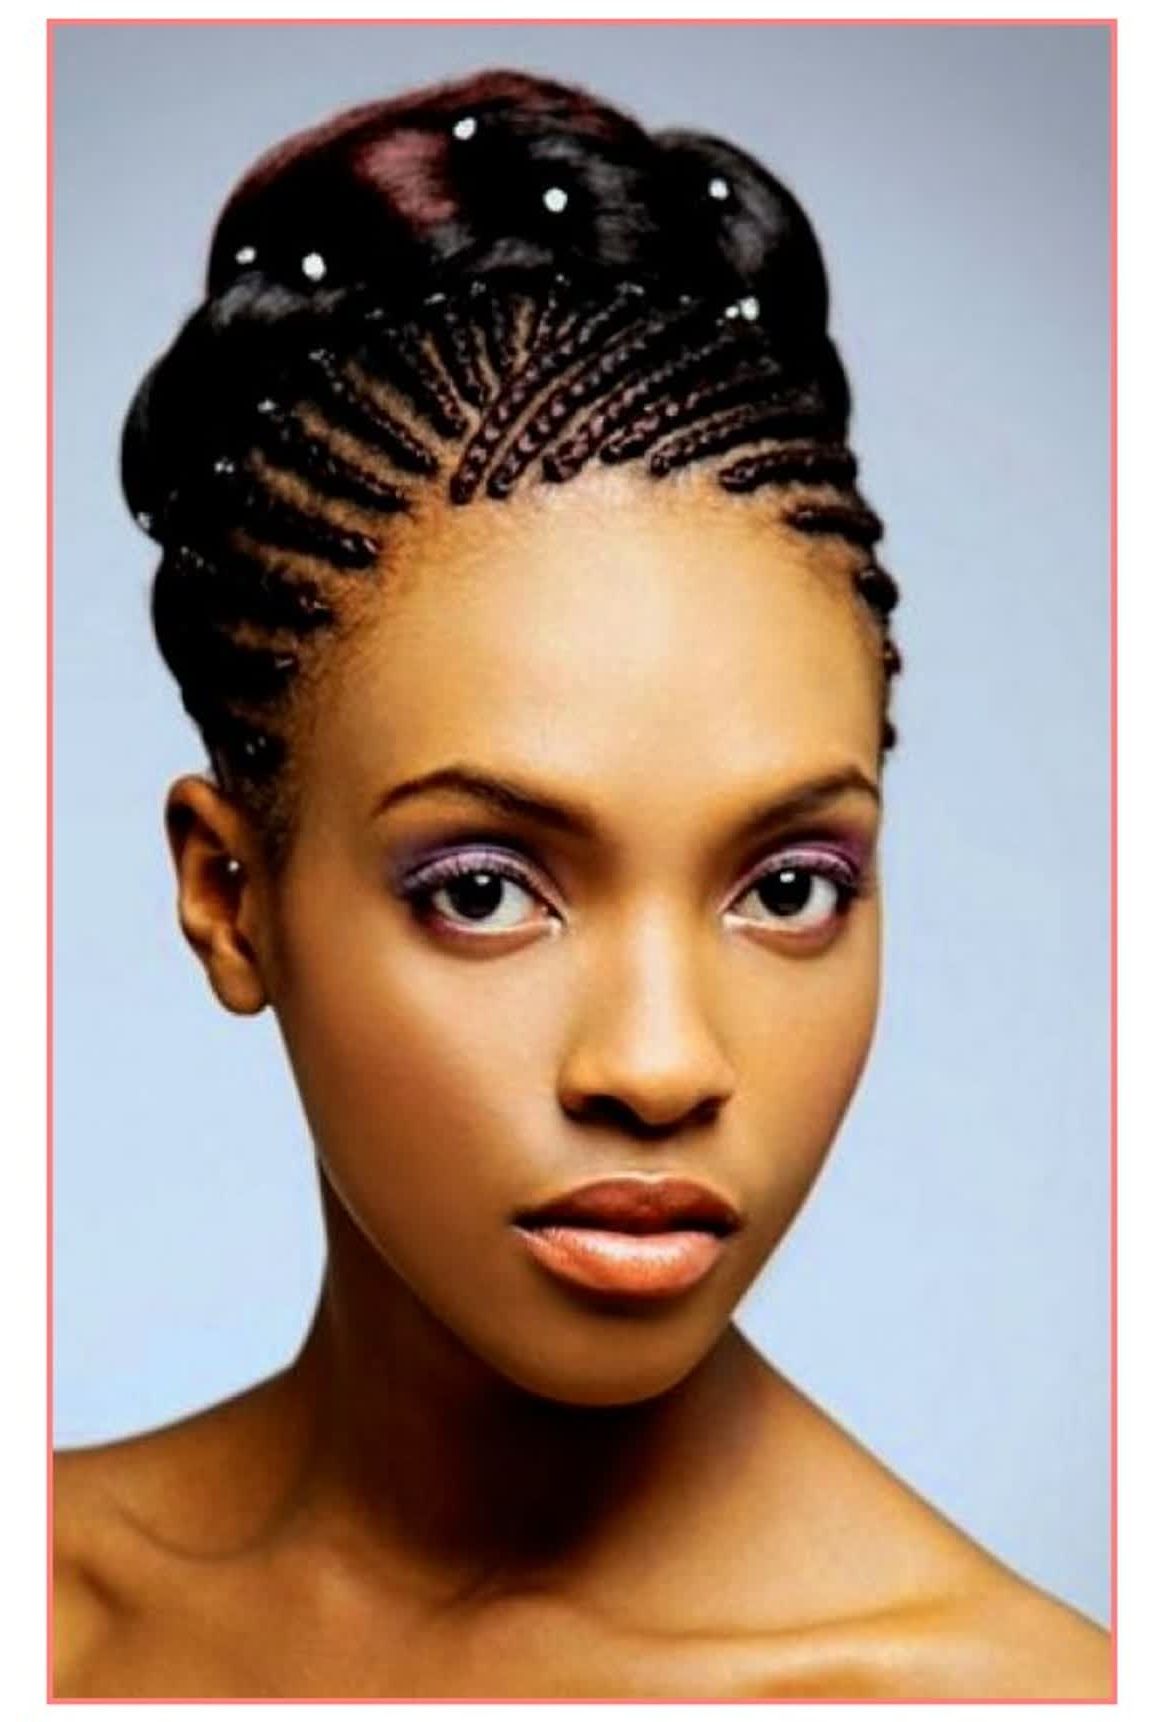 African Wedding Hairstyle Best Ideas African Wedding Hairstyles 2018 For Most Current African Wedding Hairstyles (View 2 of 15)